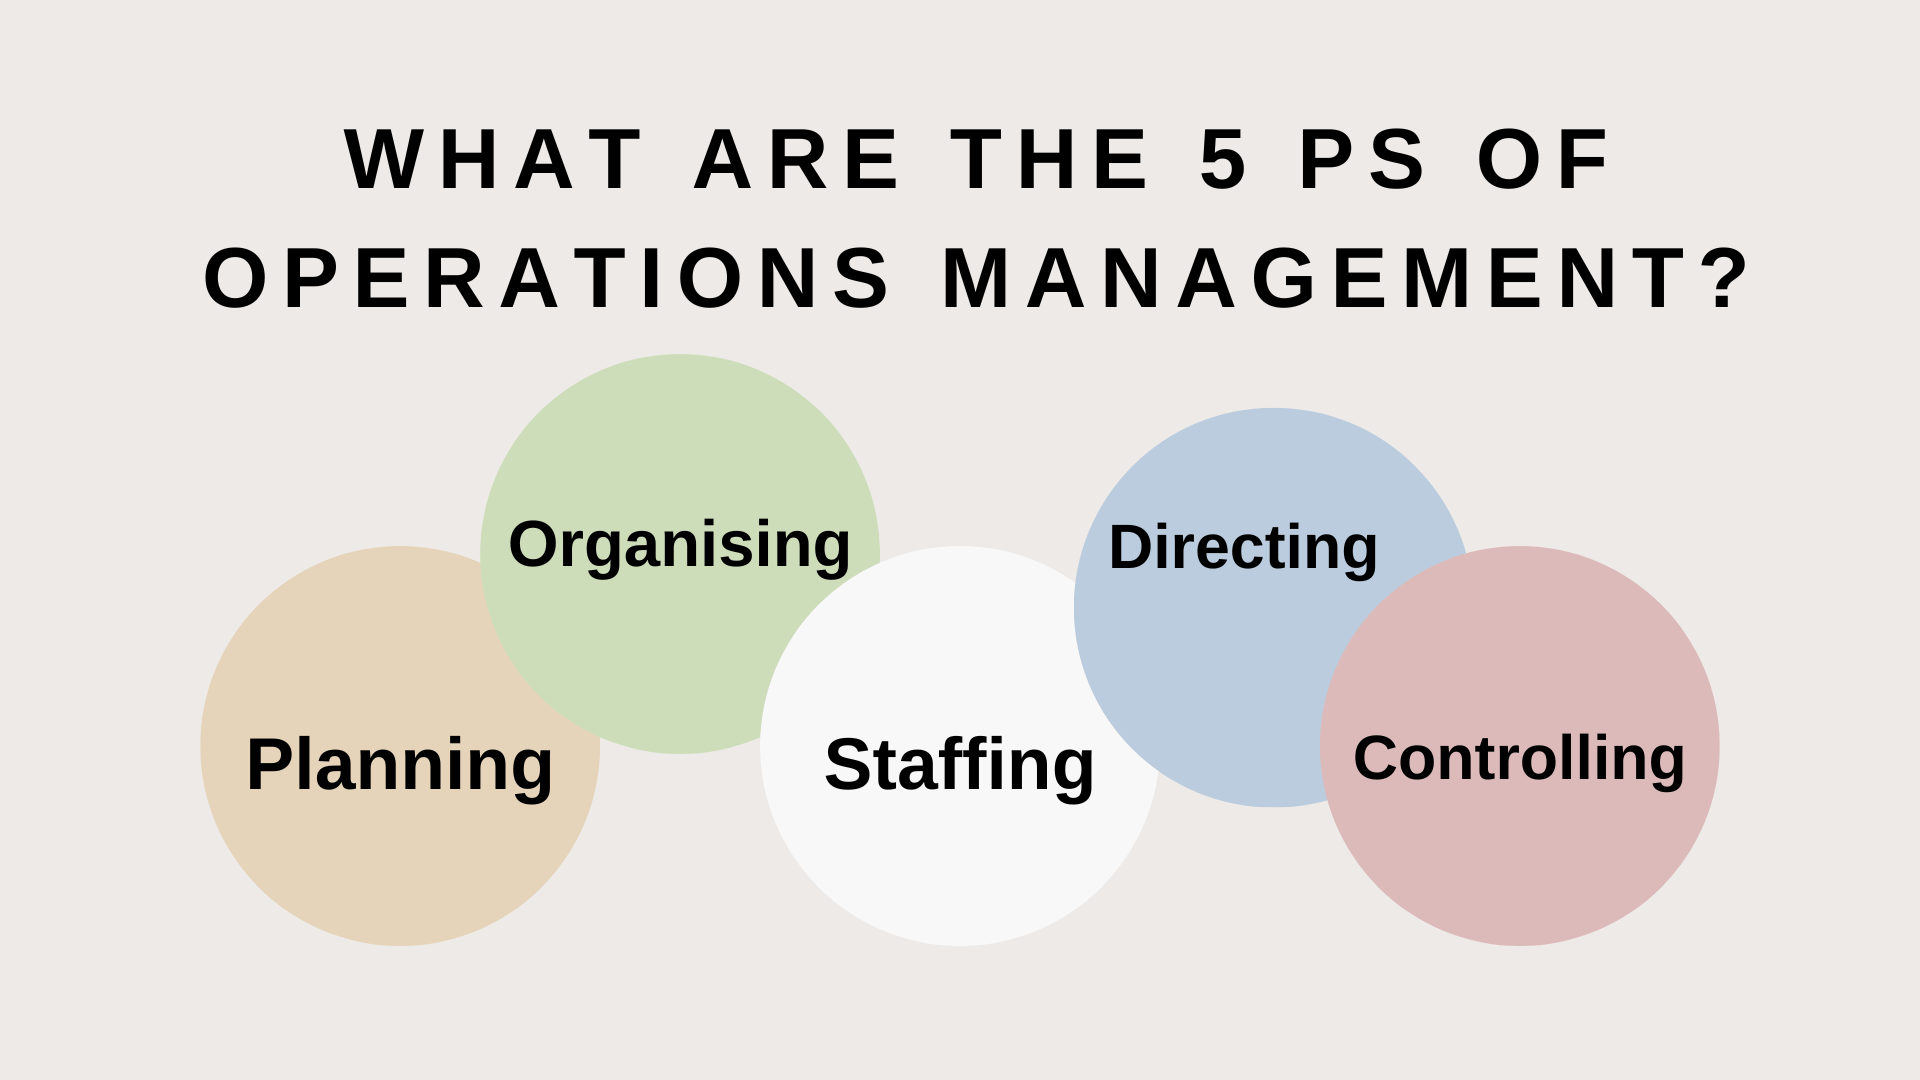 What are the 5 Ps of operations management?